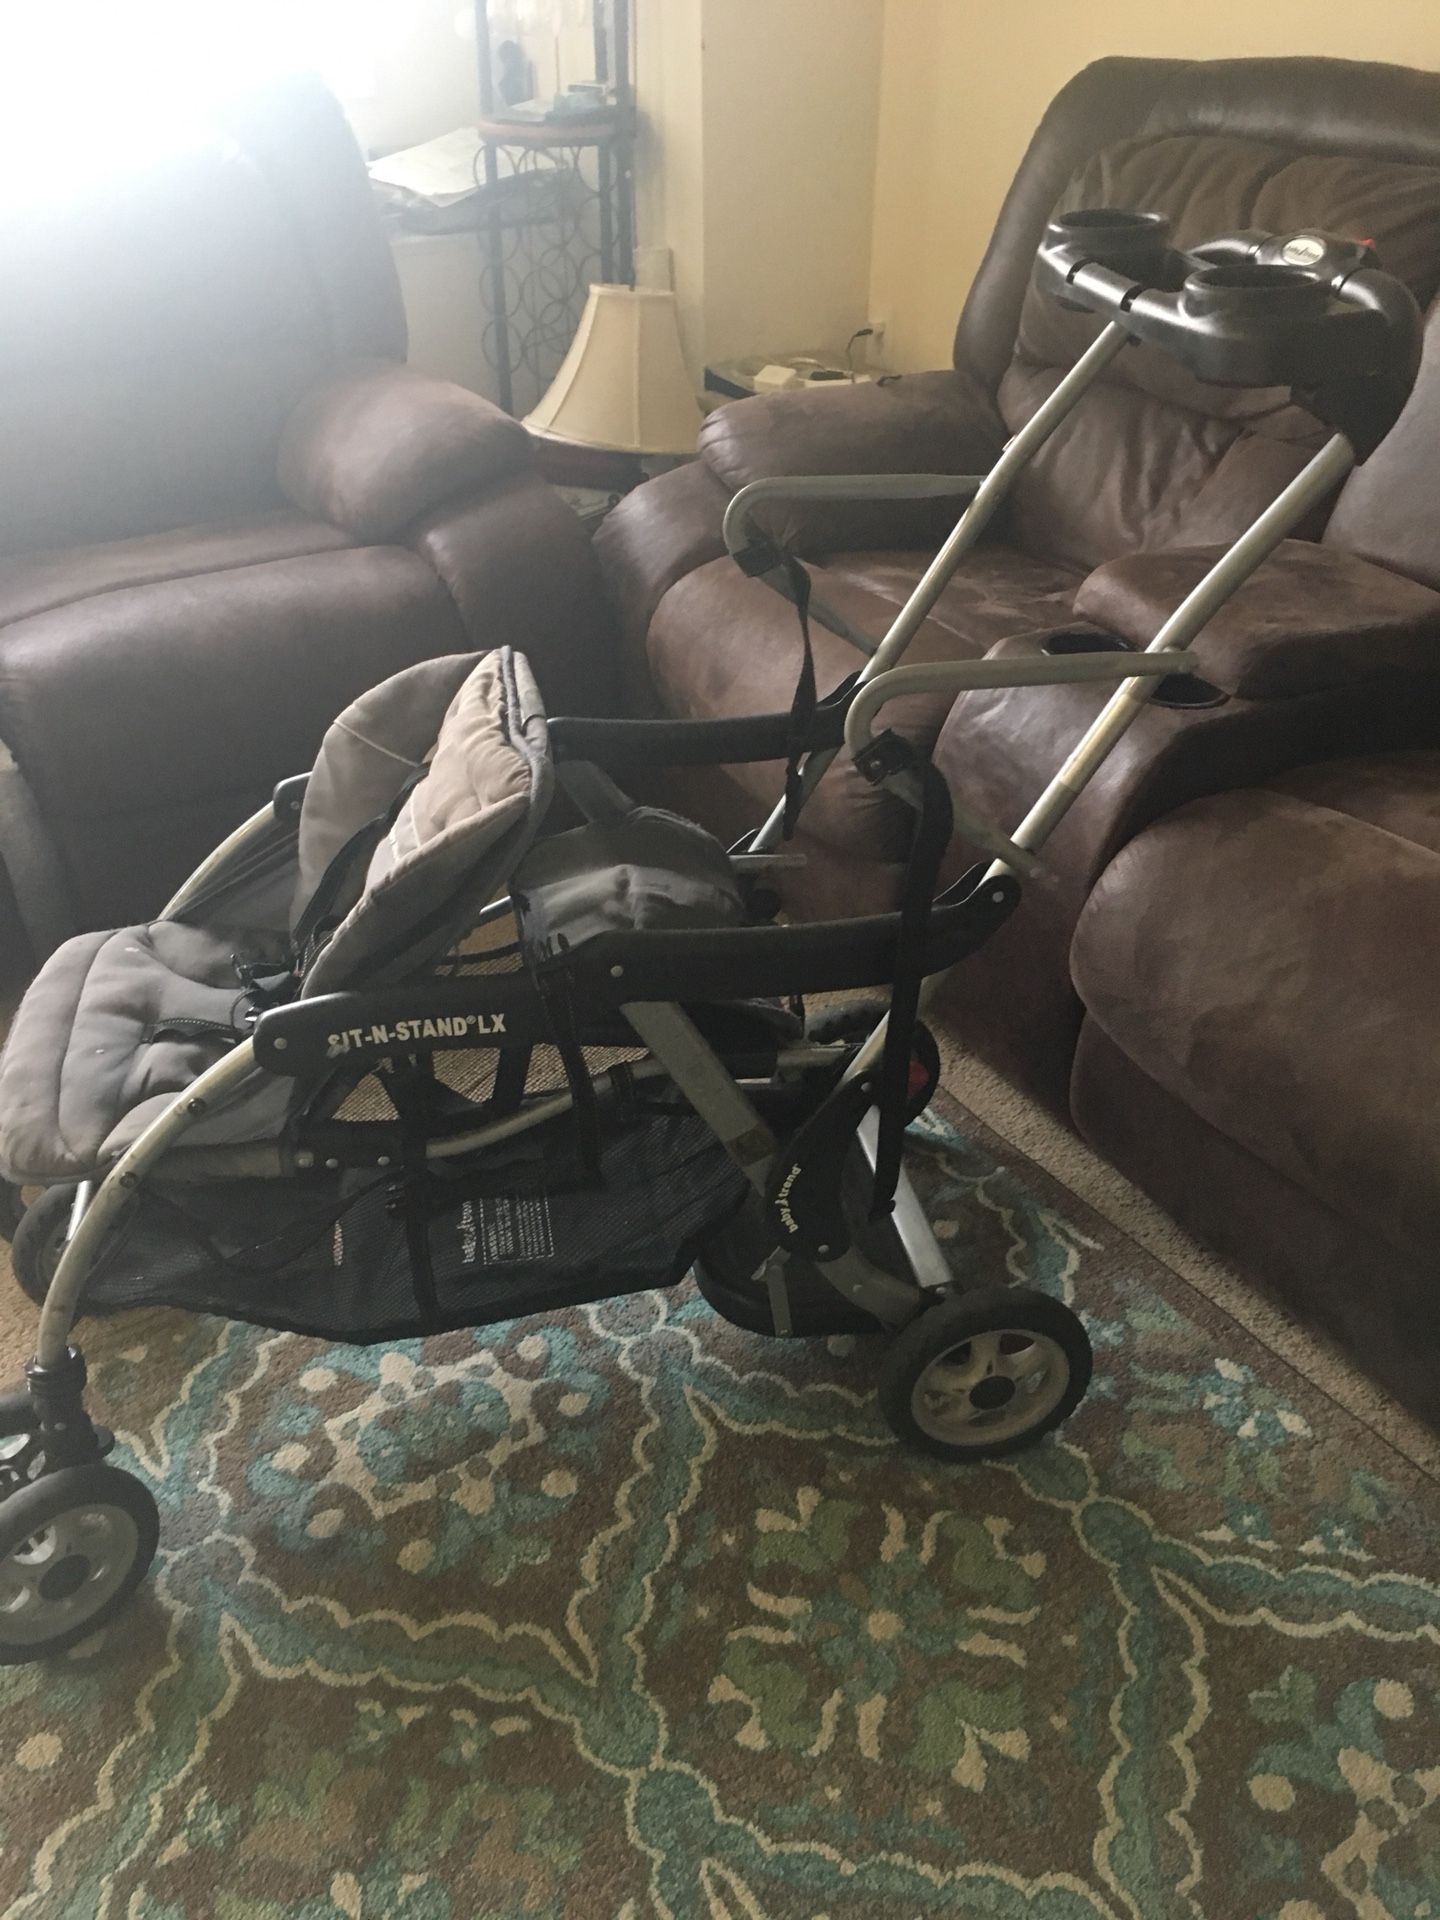 SIT-N-STAND LX double stroller